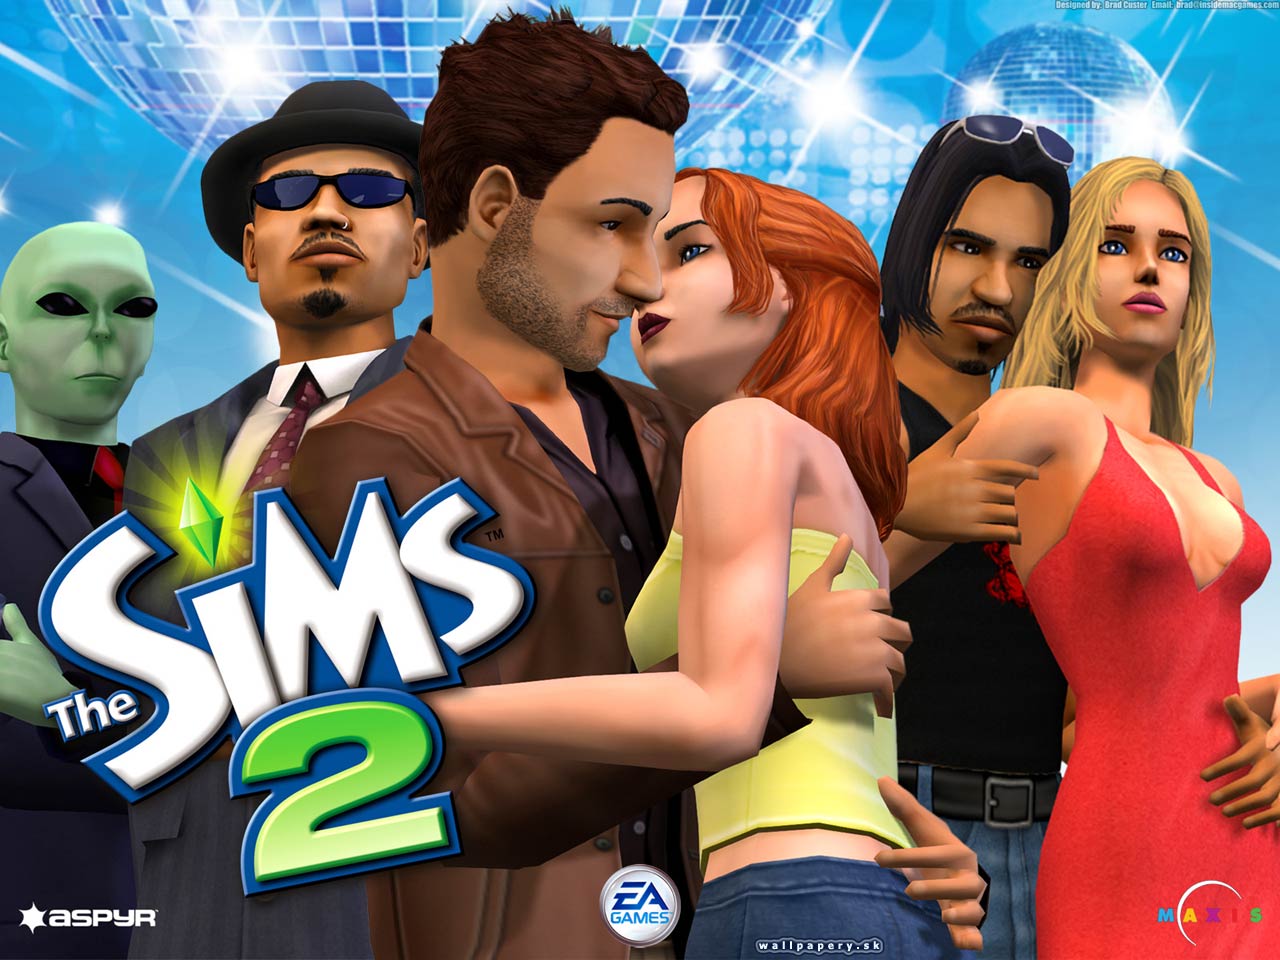 The Sims 2 - wallpaper 26